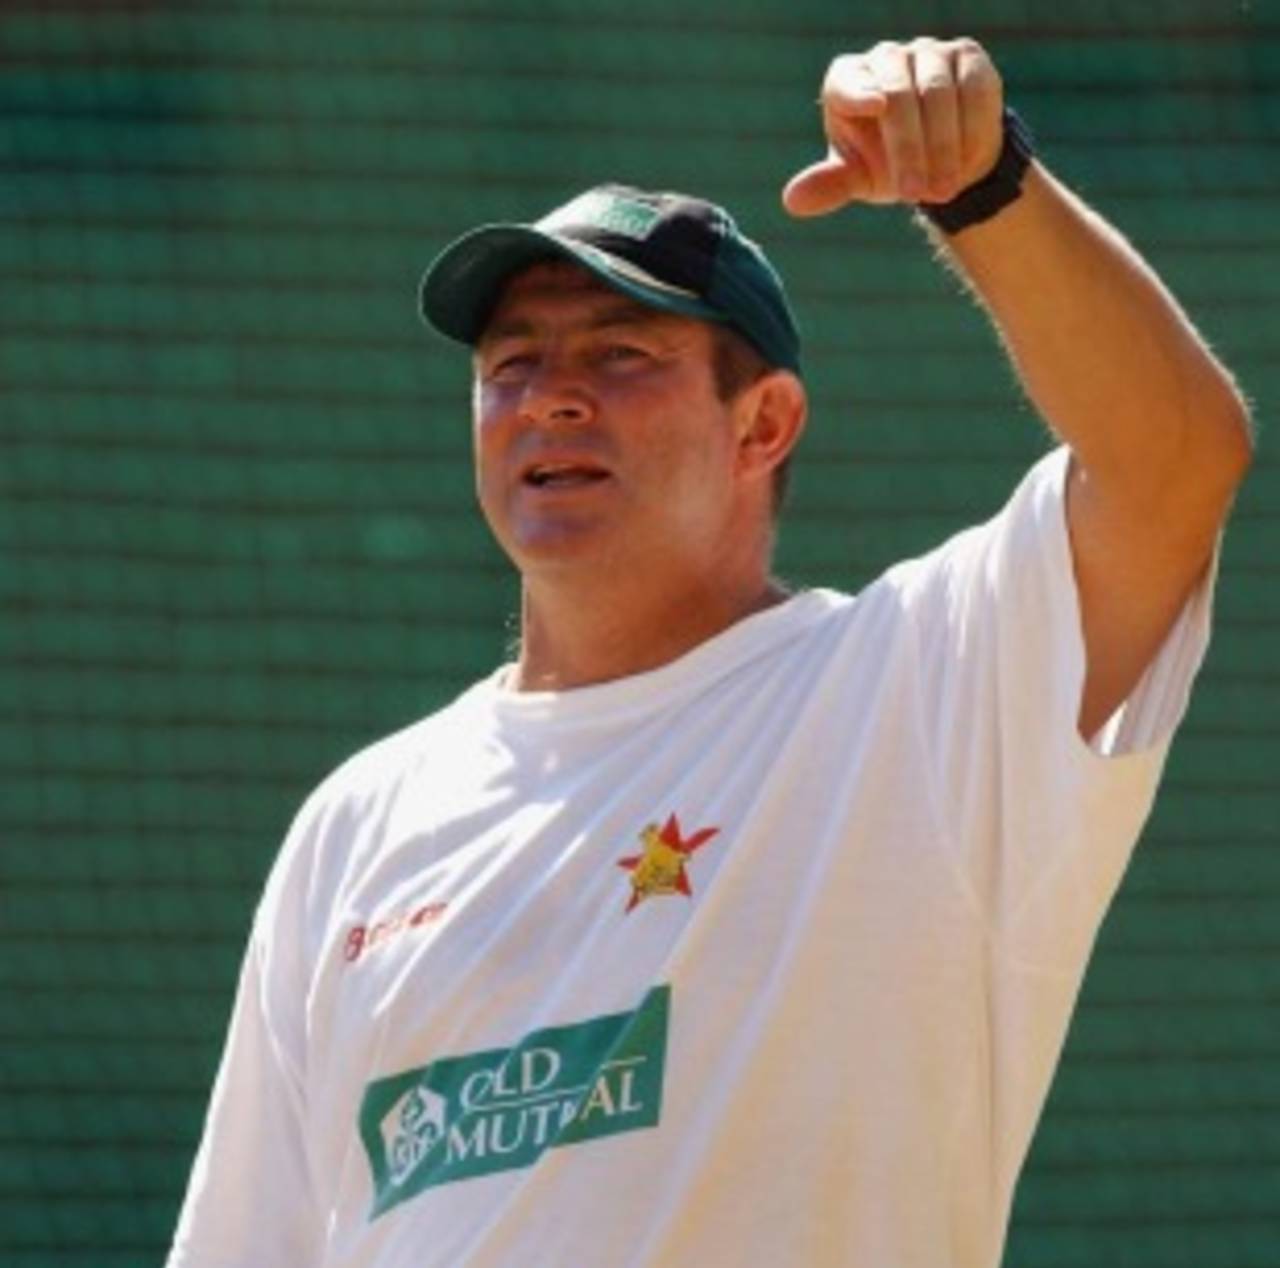 Zimbabwe coach Geoff Marsh during a practice session, Bloemfontein, March 11, 2003